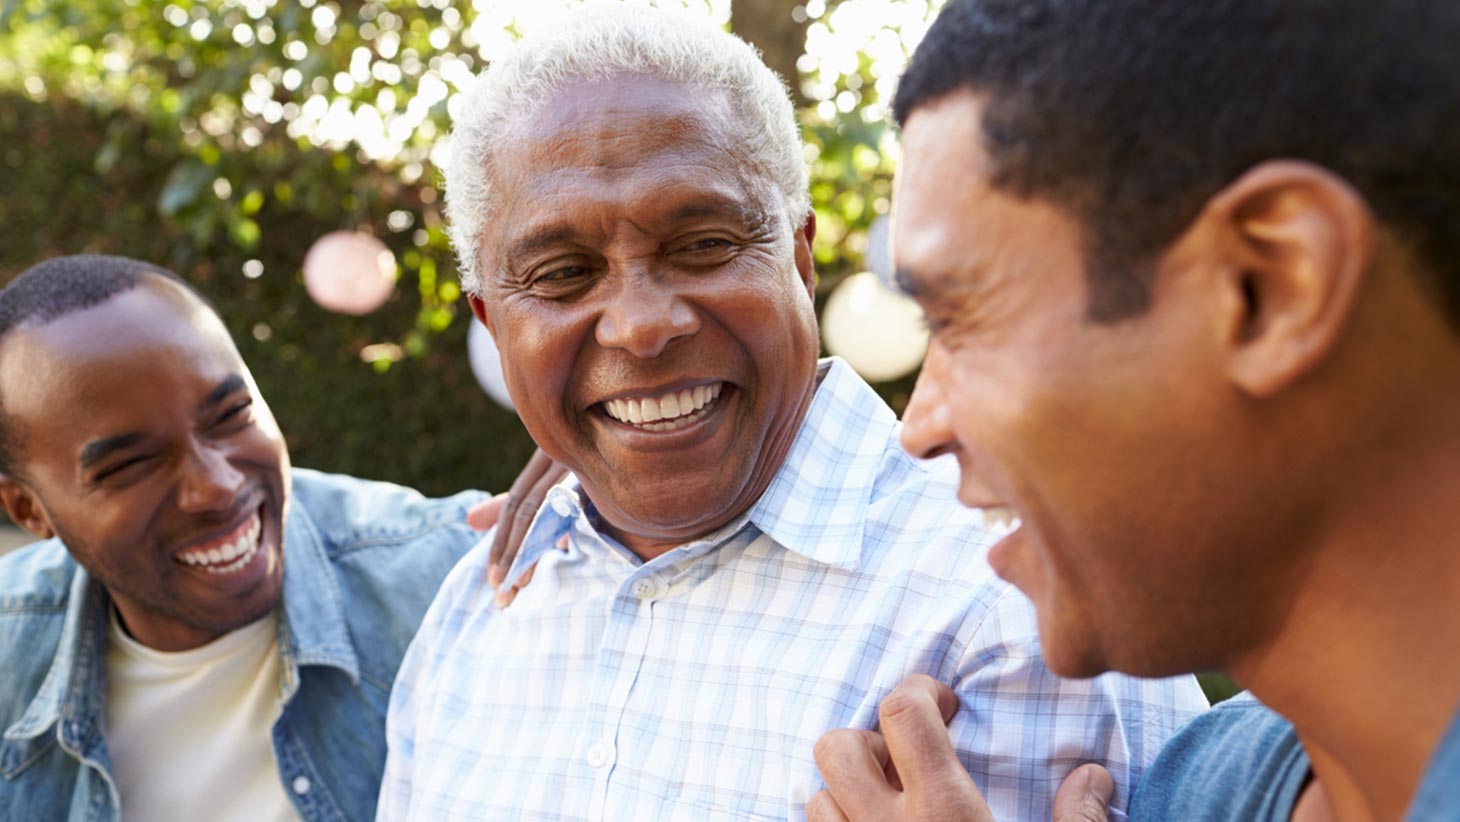 Older man sitting in garden with his two adult sons smiling and chatting during a nice day.